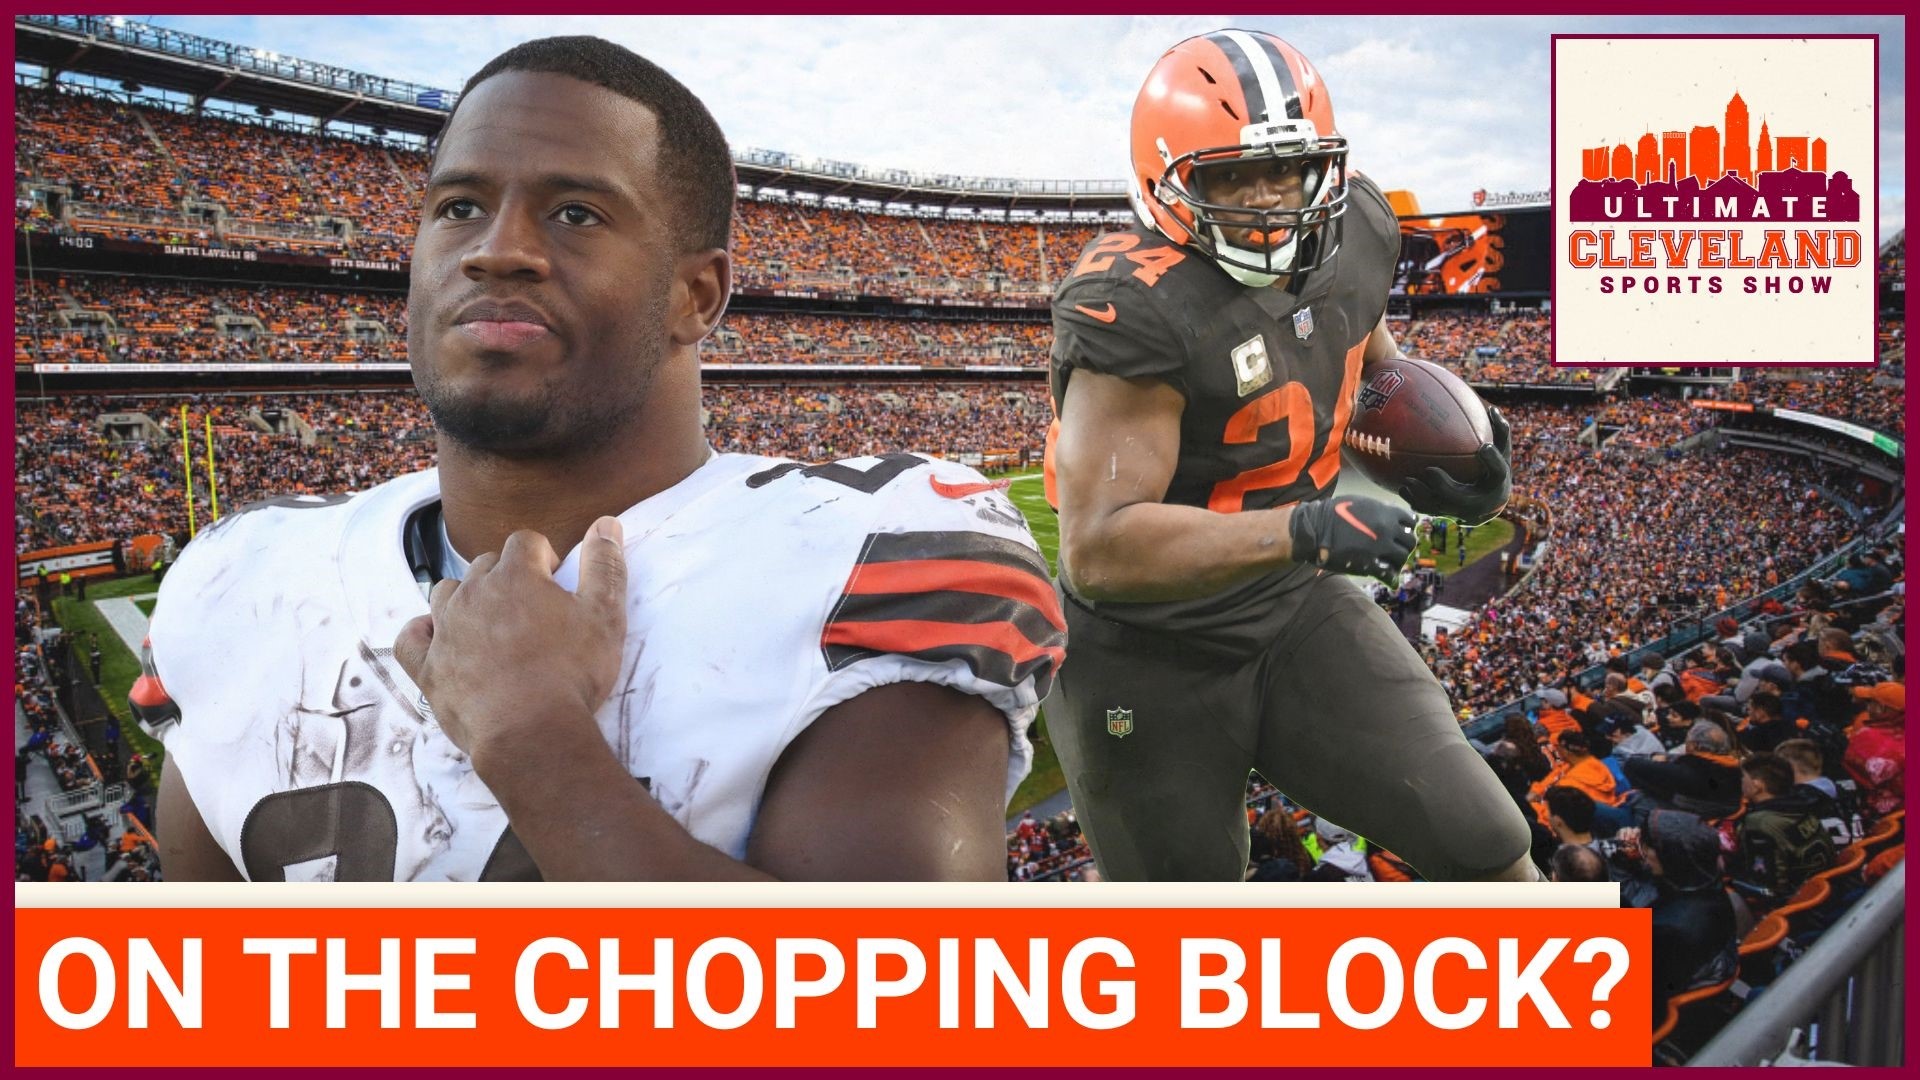 Could the Cleveland Browns cut Nick Chubb? With a 16 million dollar cap hit Nick Chubb's contract is an issue BUT it would be crazy for the Cleveland Browns to move